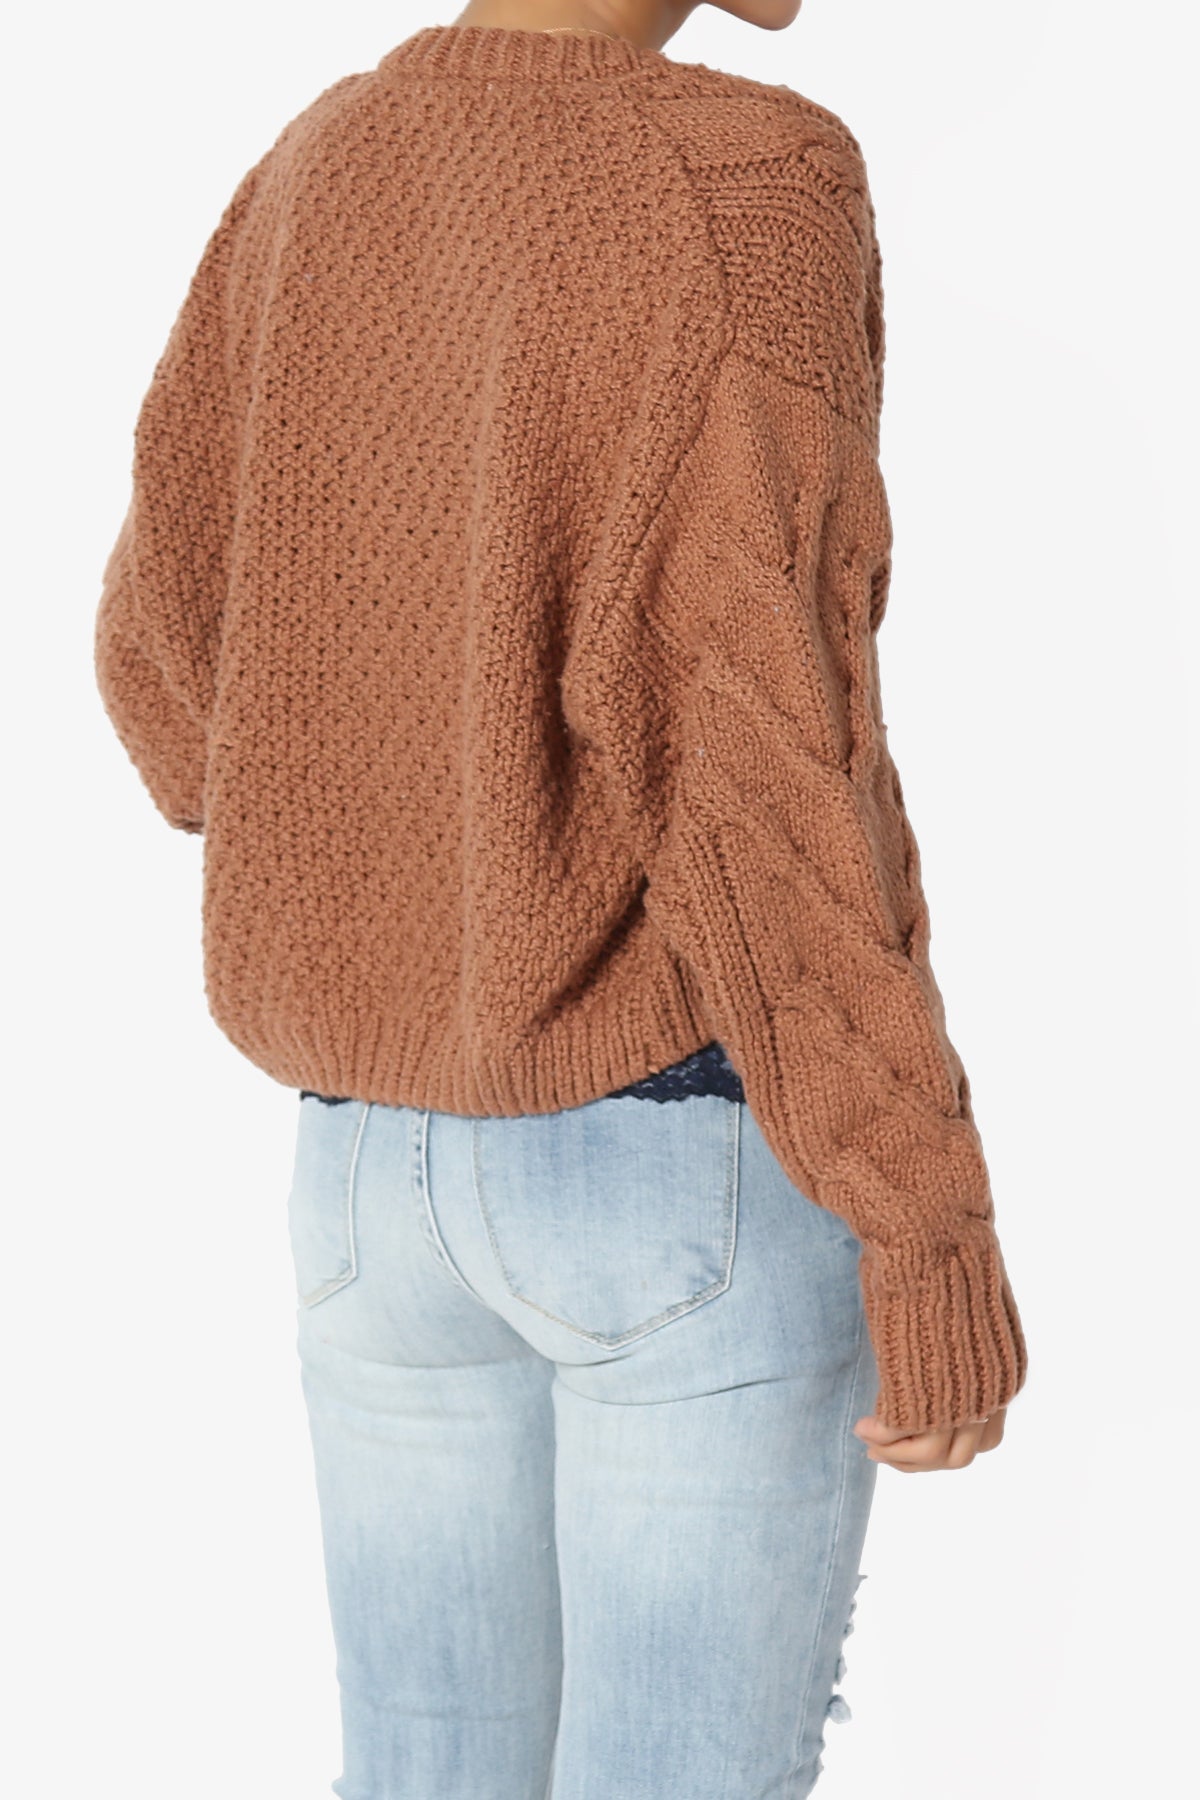 Spain Cropped Cable Knit Sweater Cardigan